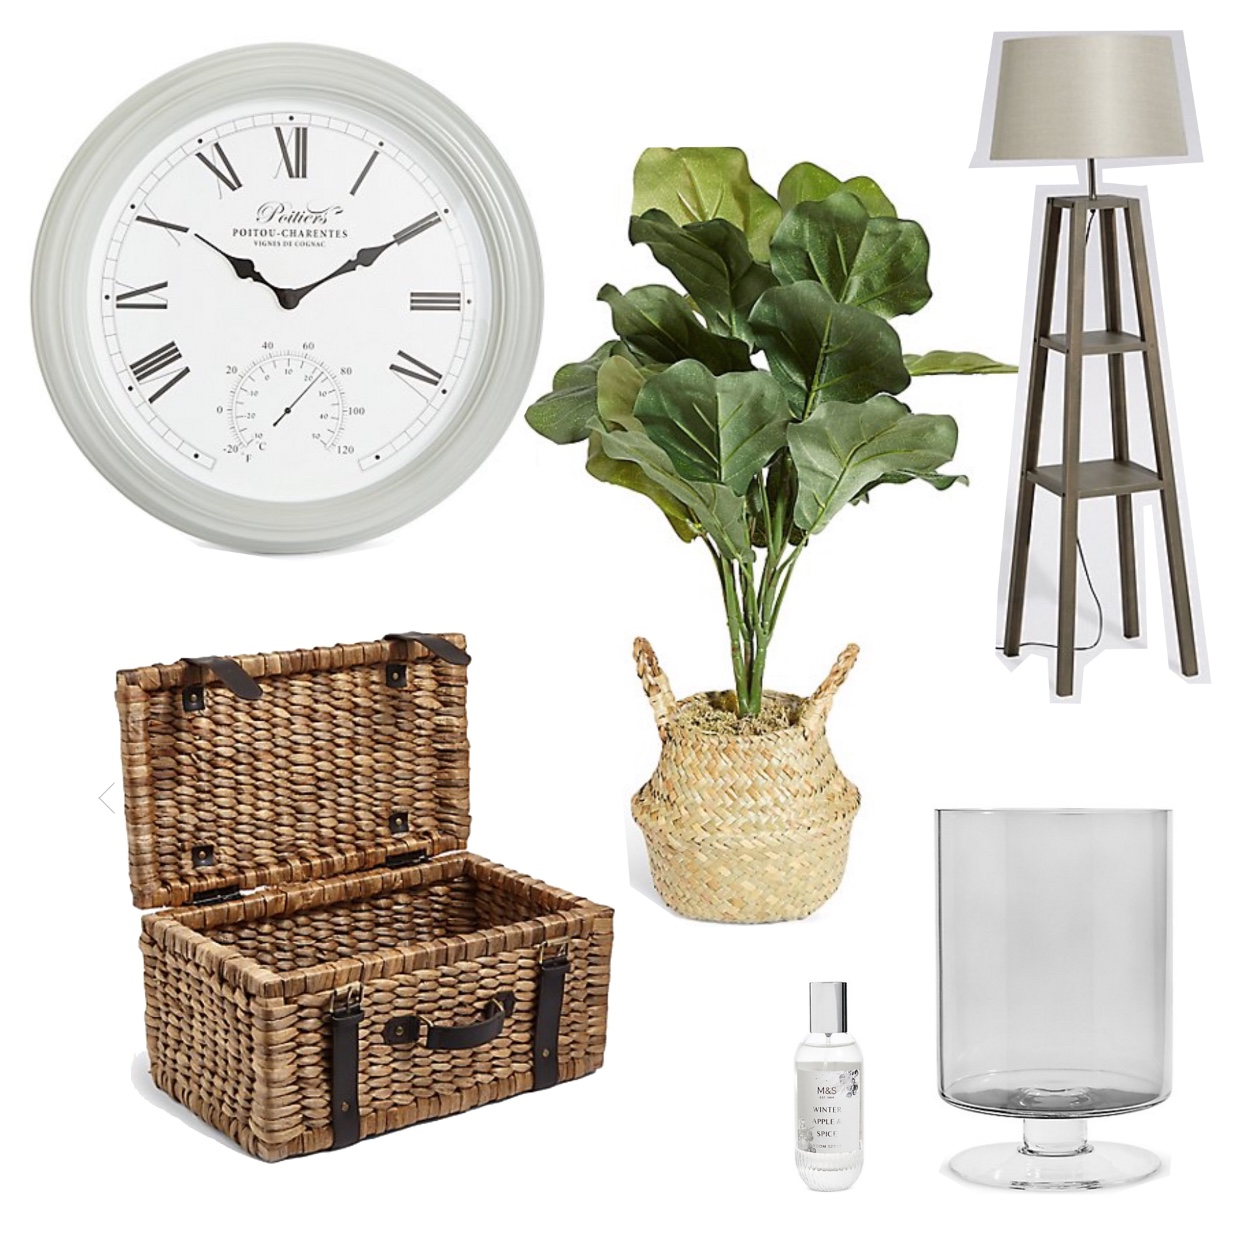 my midlife fashion, marks and spencer, marks and spencer homeware, marks and spencer large footed hurricane, marks and spencer water hyacinth suitcase storage box, marks and spencer medium fiddle leaf fig tree, marks and spencer large poitier wall clock, marks and spencer theo grey wood shelves floor lamp